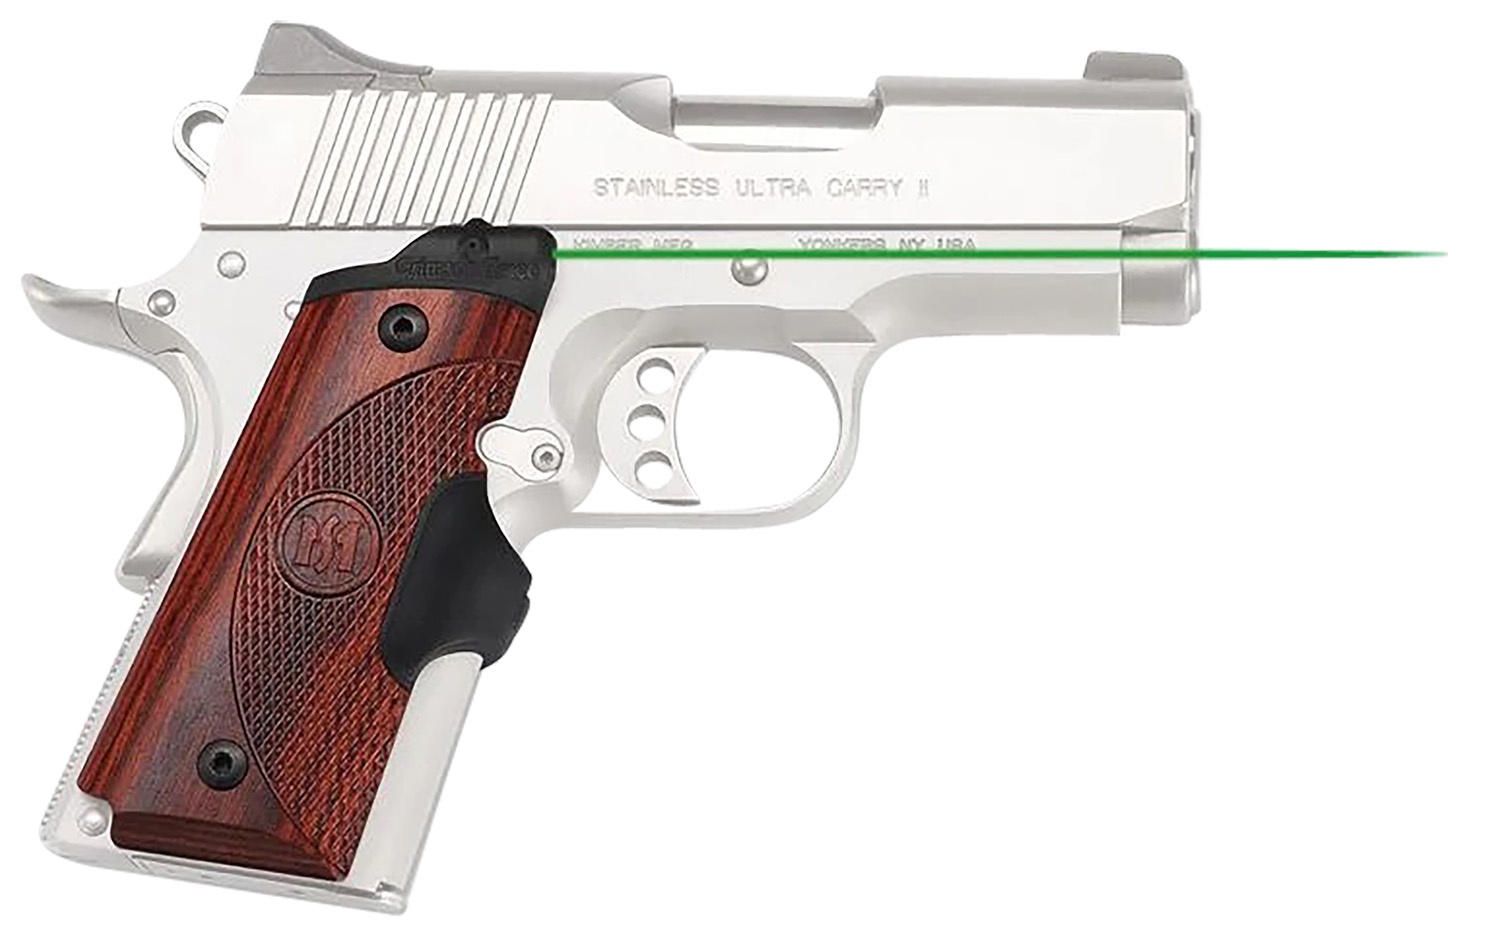 Crimson Trace LG902G Lasergrips Master Series Green Laser 5mW 532nM Wavelength, Rosewood Grip Replacements, Fits 1911 Compact